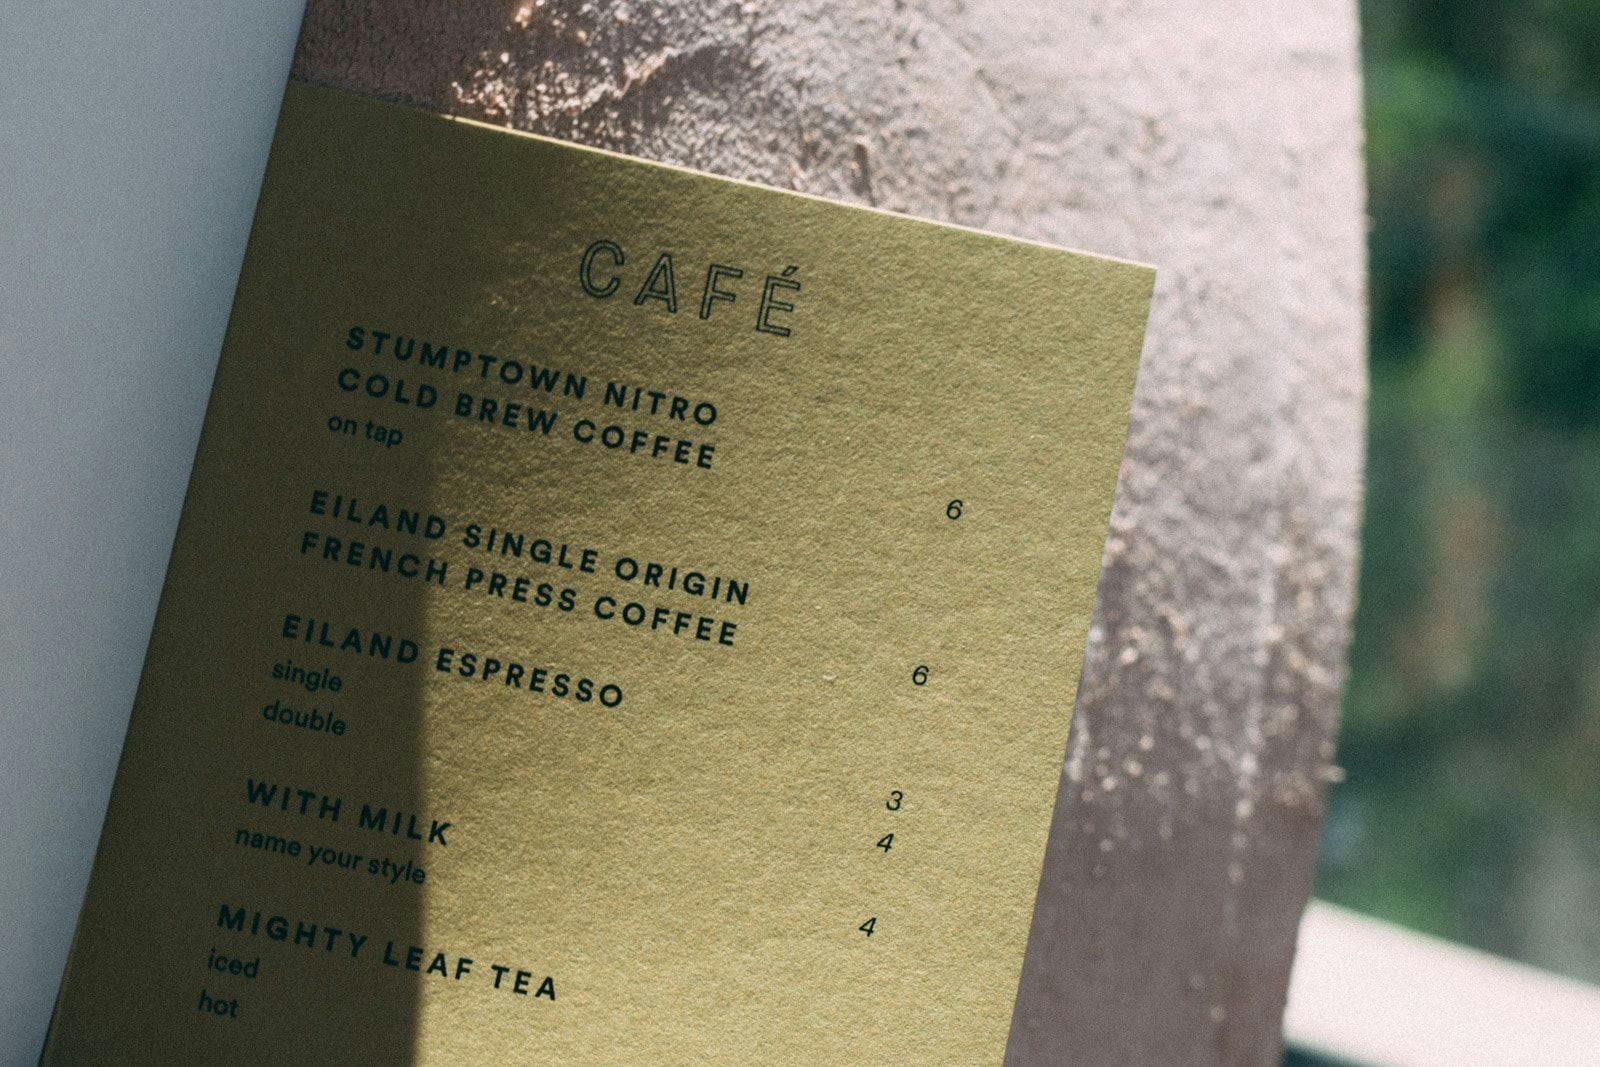 A sneak peak of the items on the "Cafe" menu